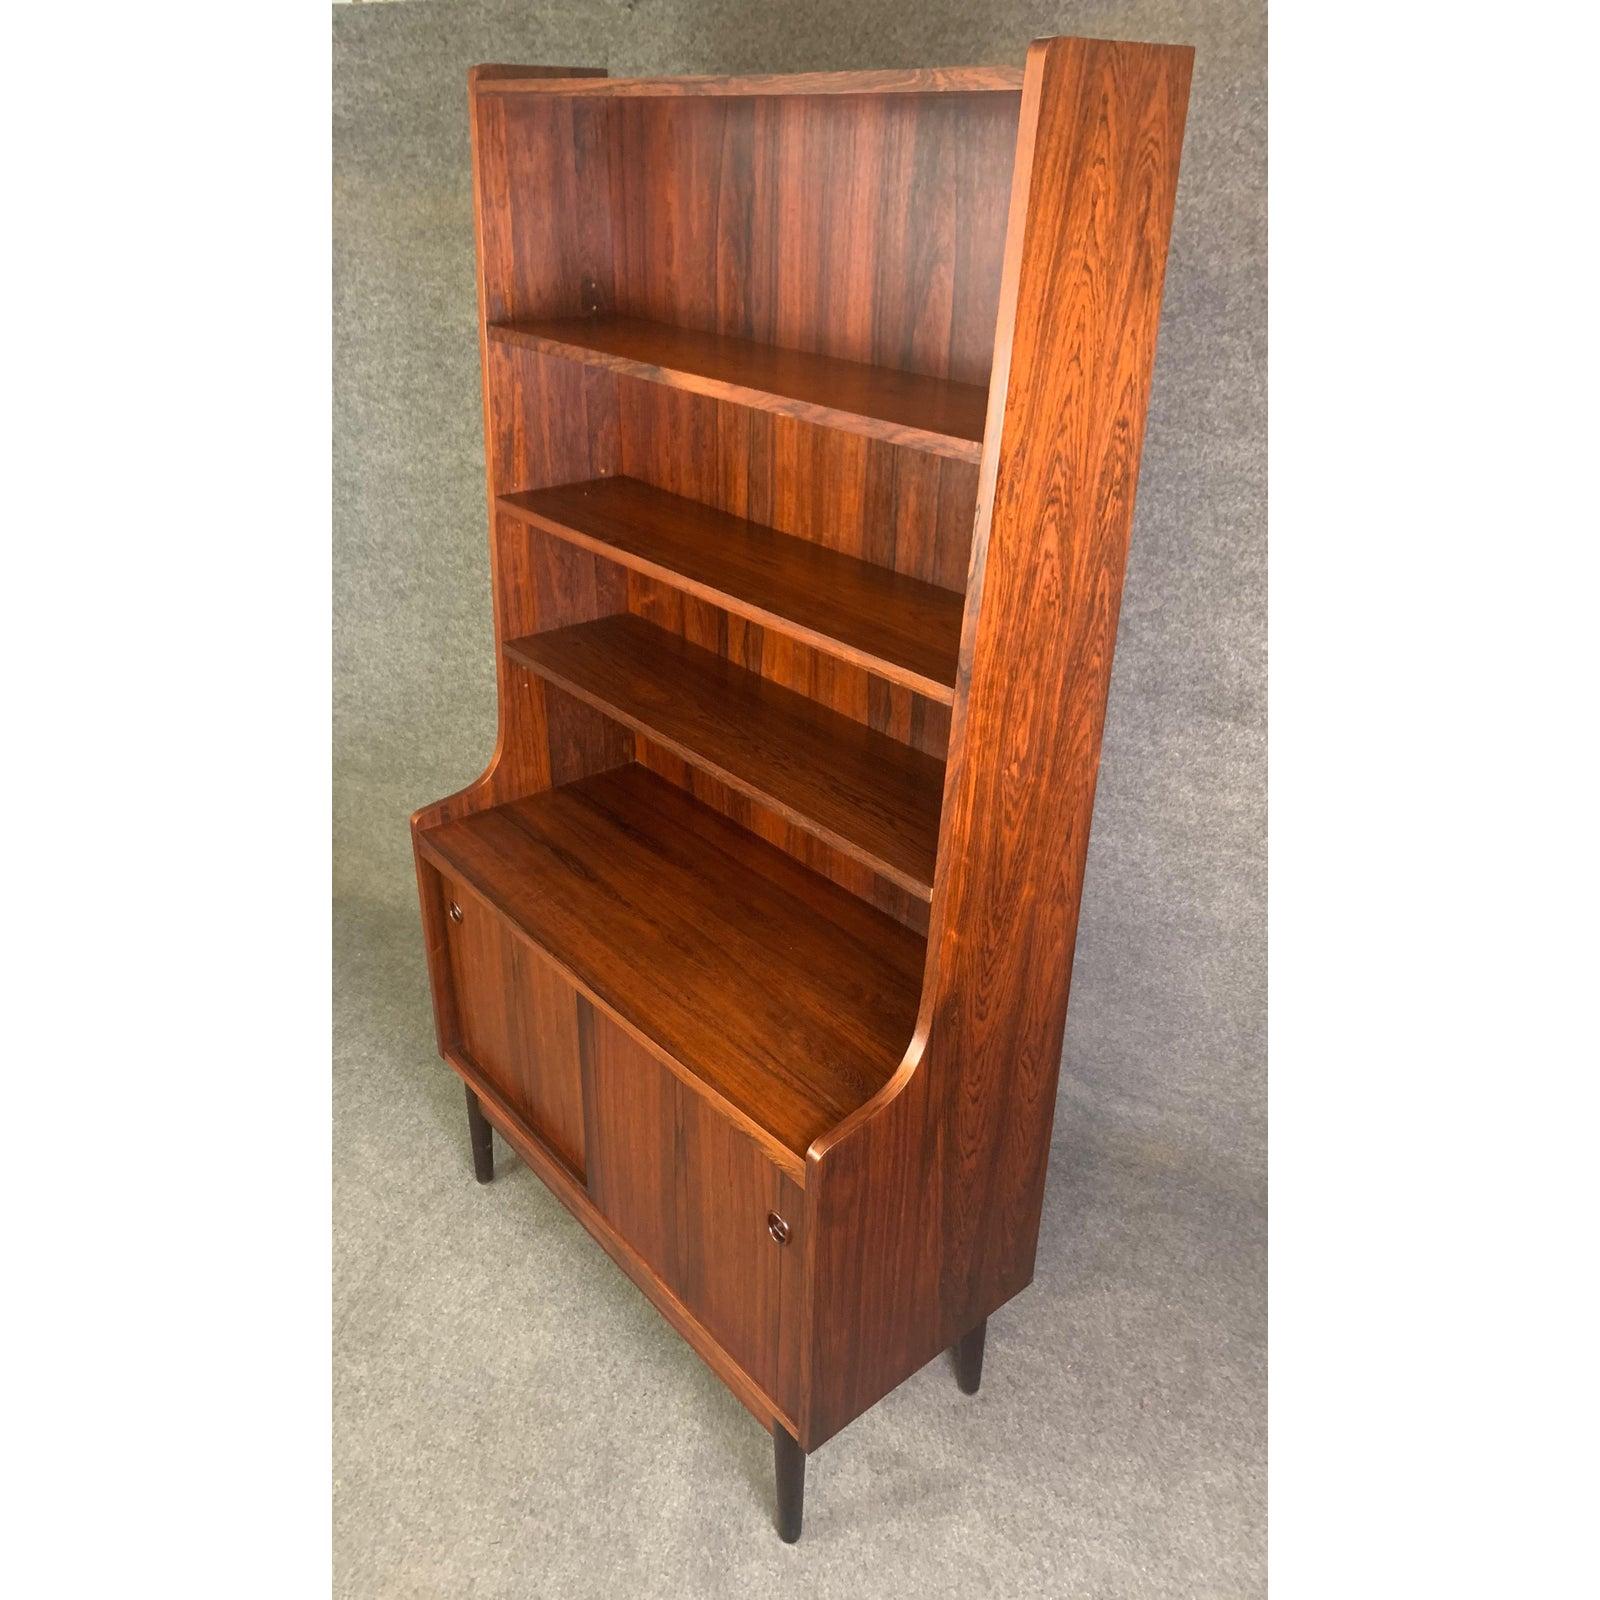 Here is a very sought after Scandinavian Modern bookcase in rosewood designed by Johannes Sorth for Bornholm Møbelfabrik in Nexø, Denmark in the 1960s. This exquisite piece features a vibrant wood grain and a large display area with three adjustable